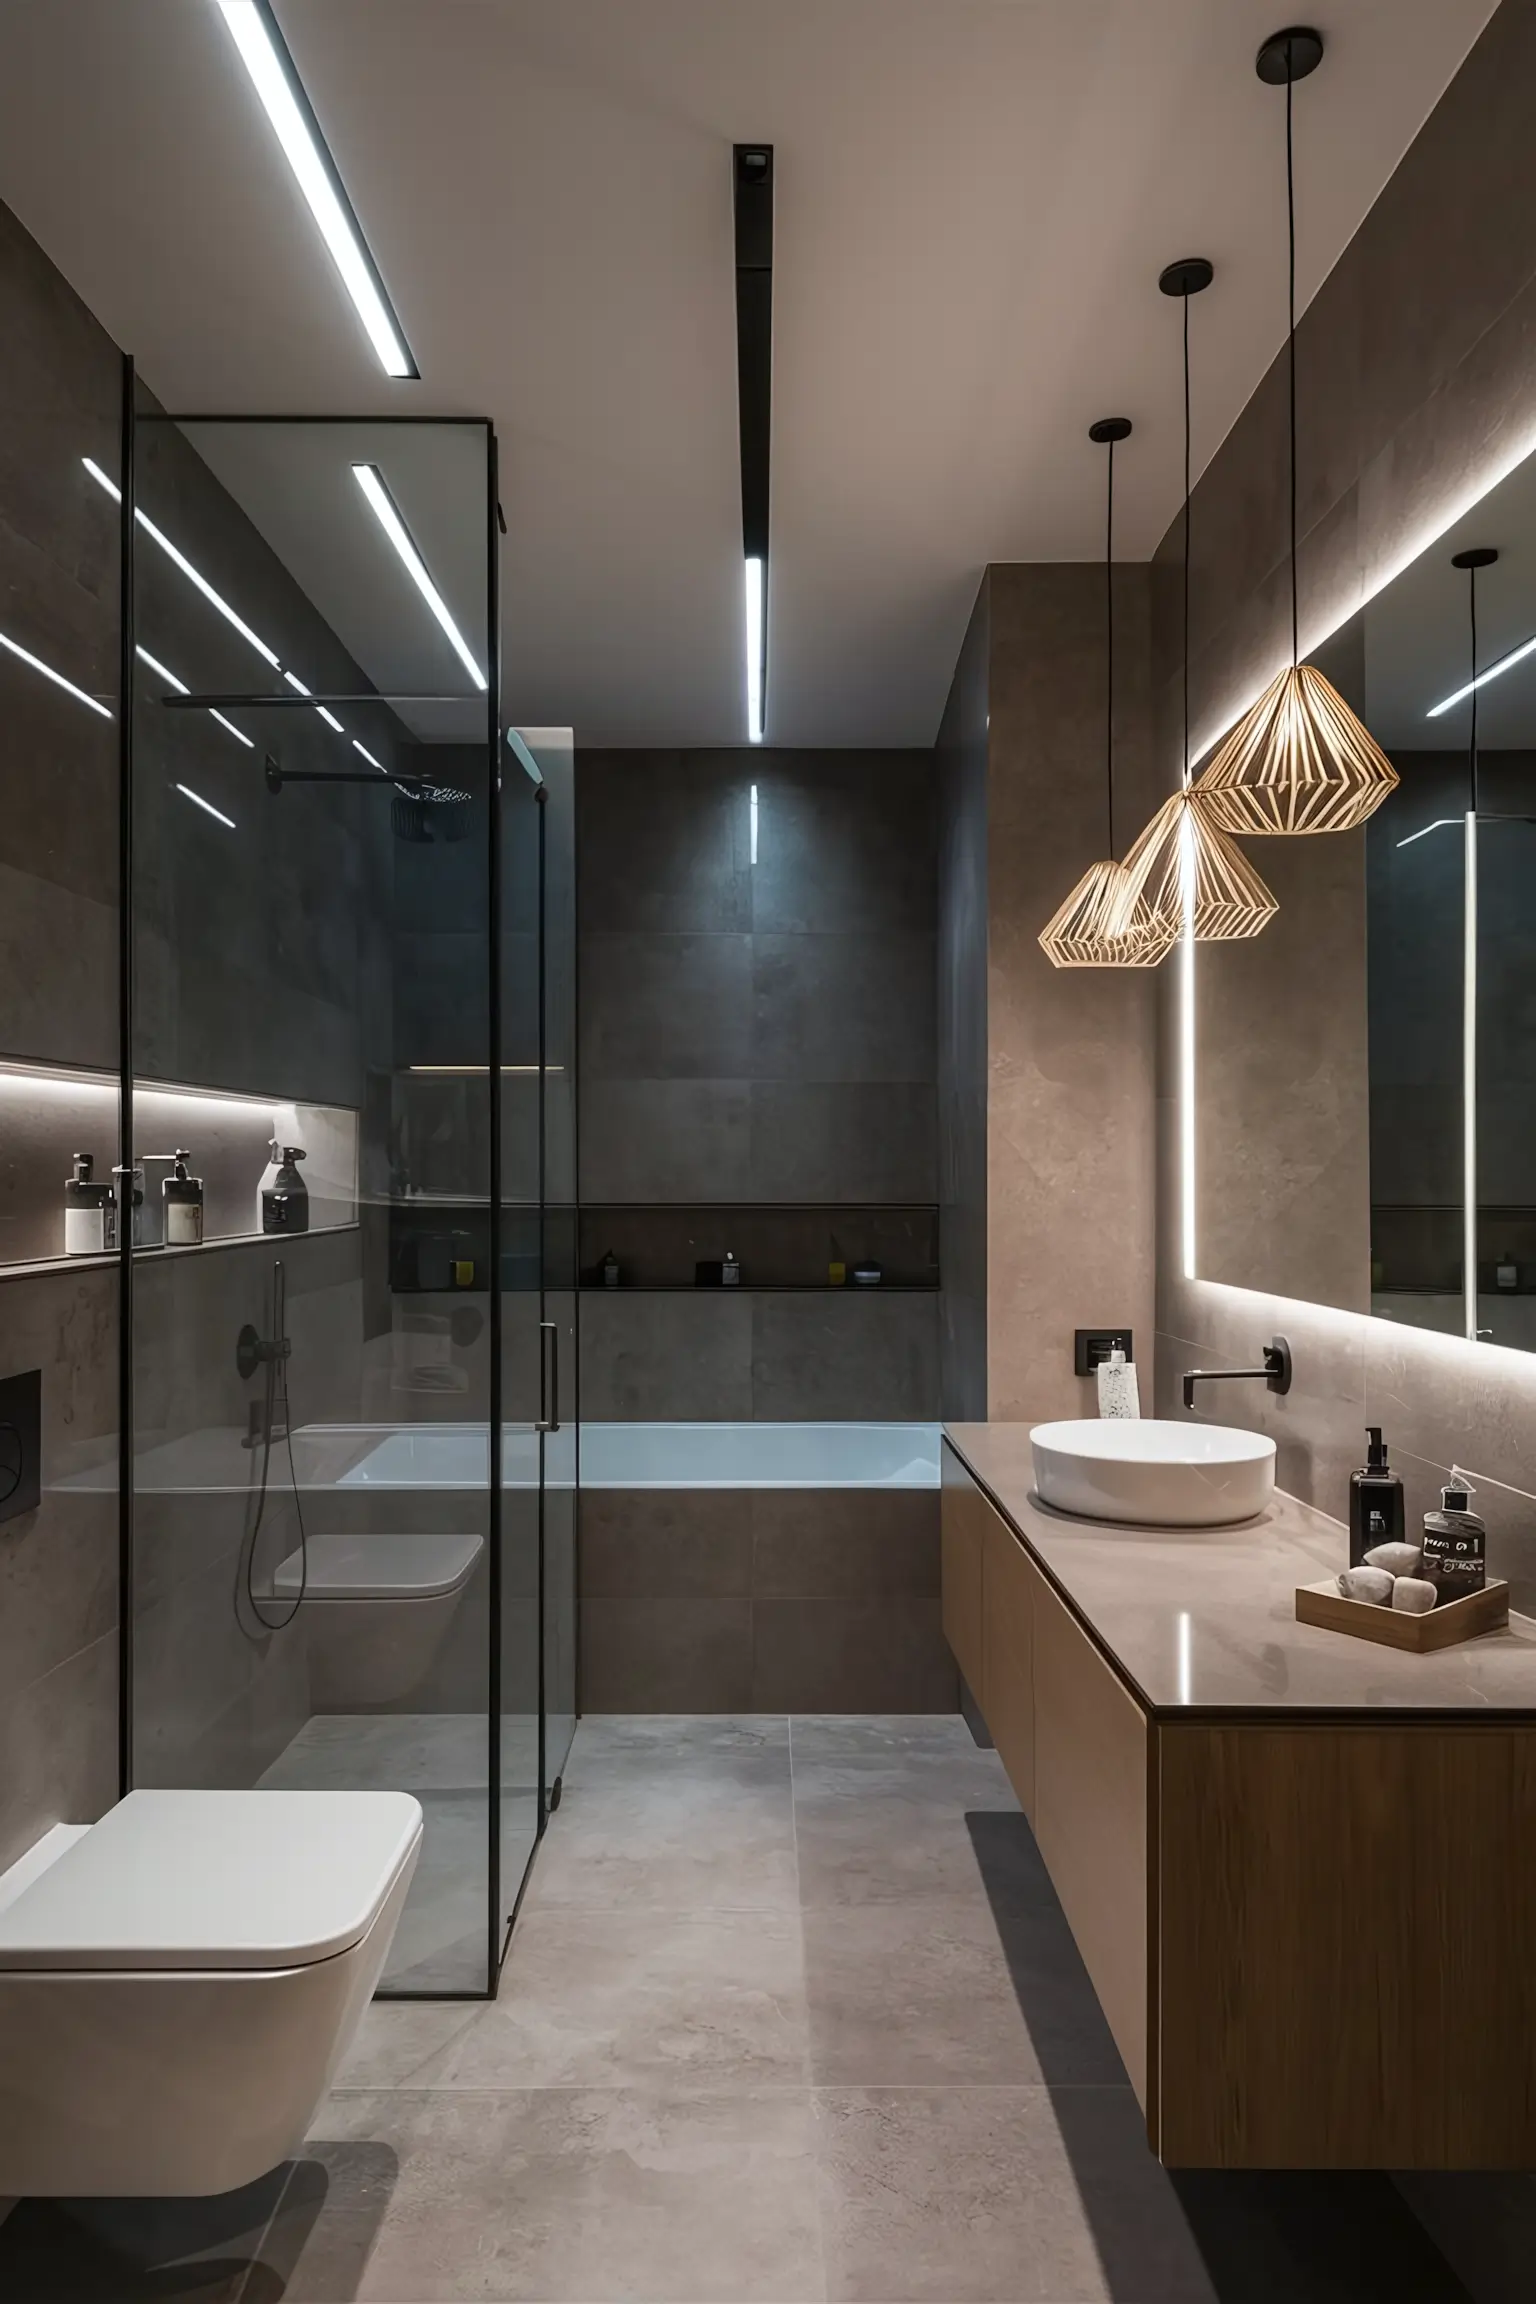 Modern bathroom with sleek, contemporary lighting fixtures including LED strip lights and geometric pendant lights.